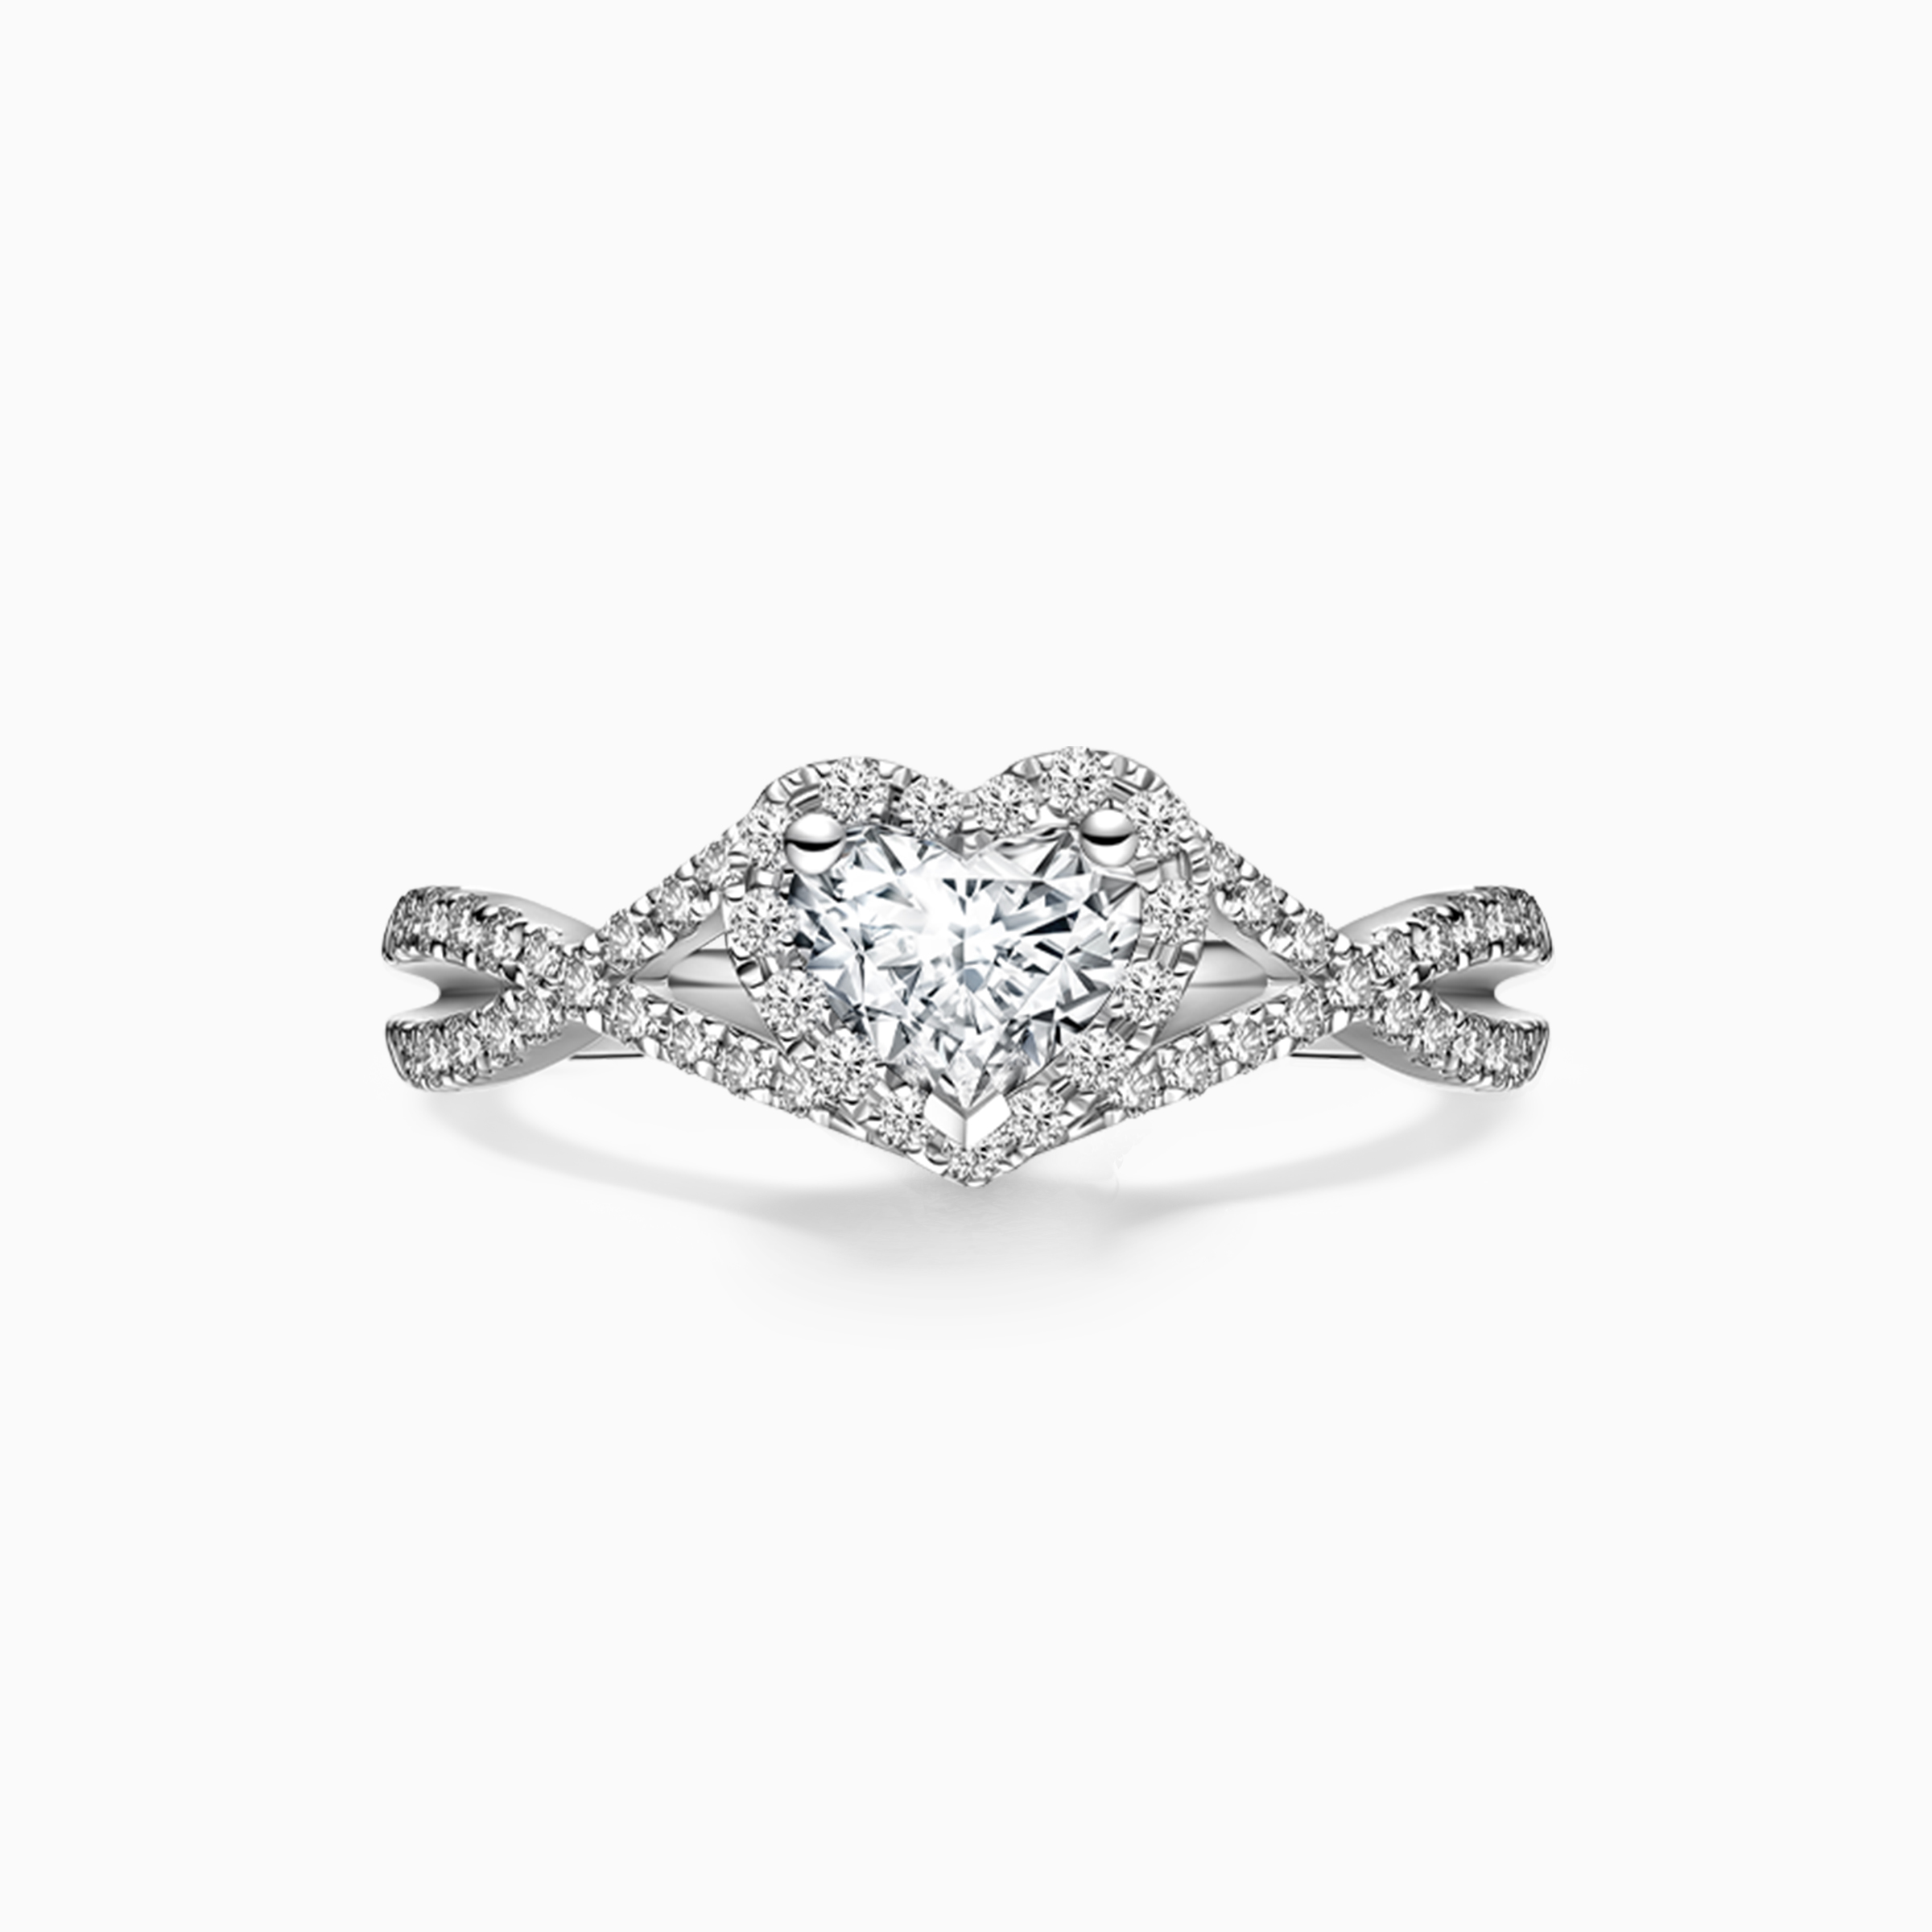 DR halo diamond engagement ring heart shaped 